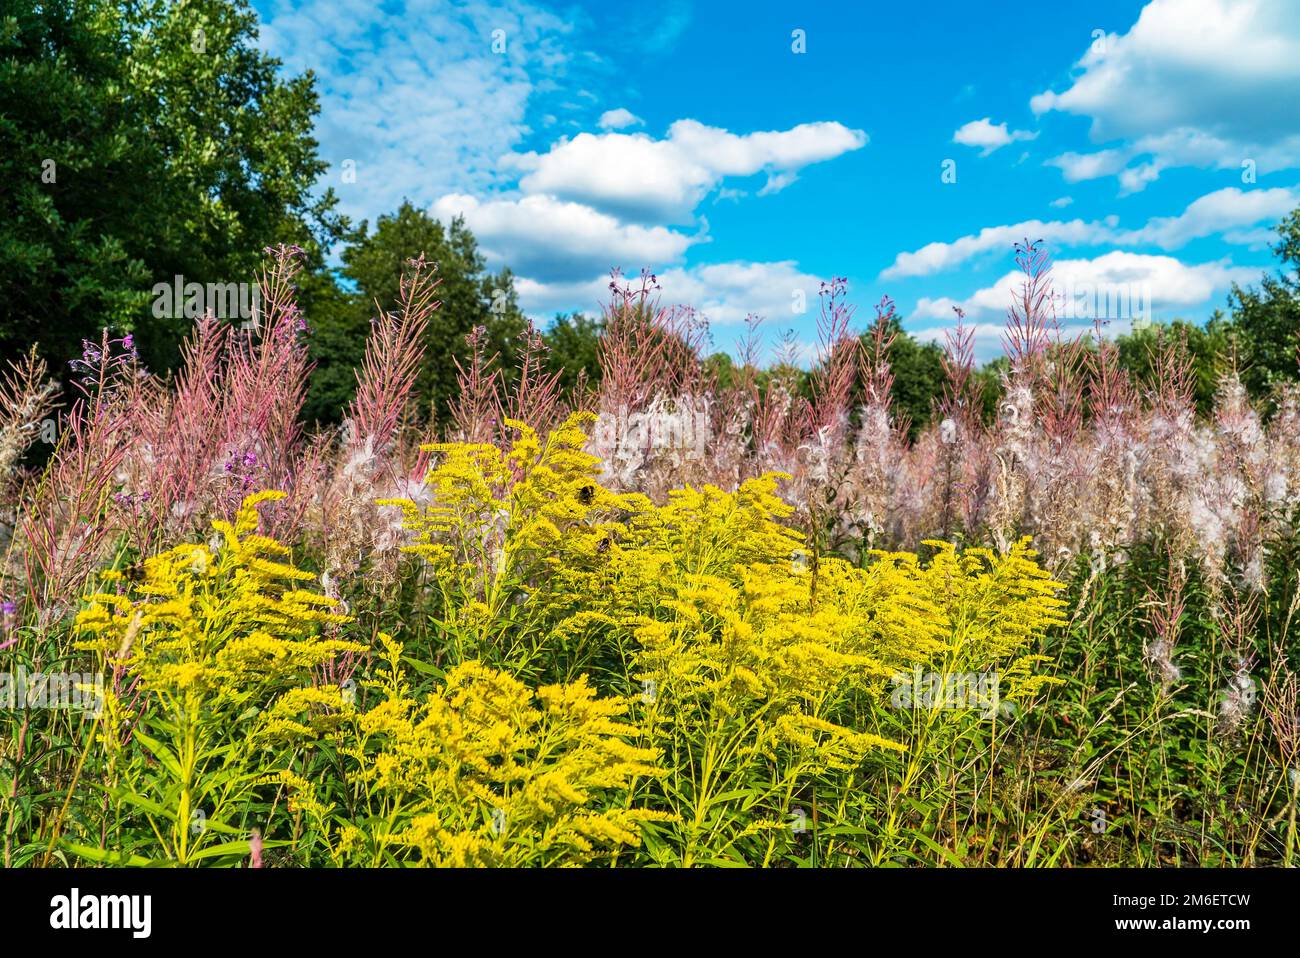 Yellow flowers of goldenrod and fluffy stems of willow - tea in a Sunny glade. Stock Photo